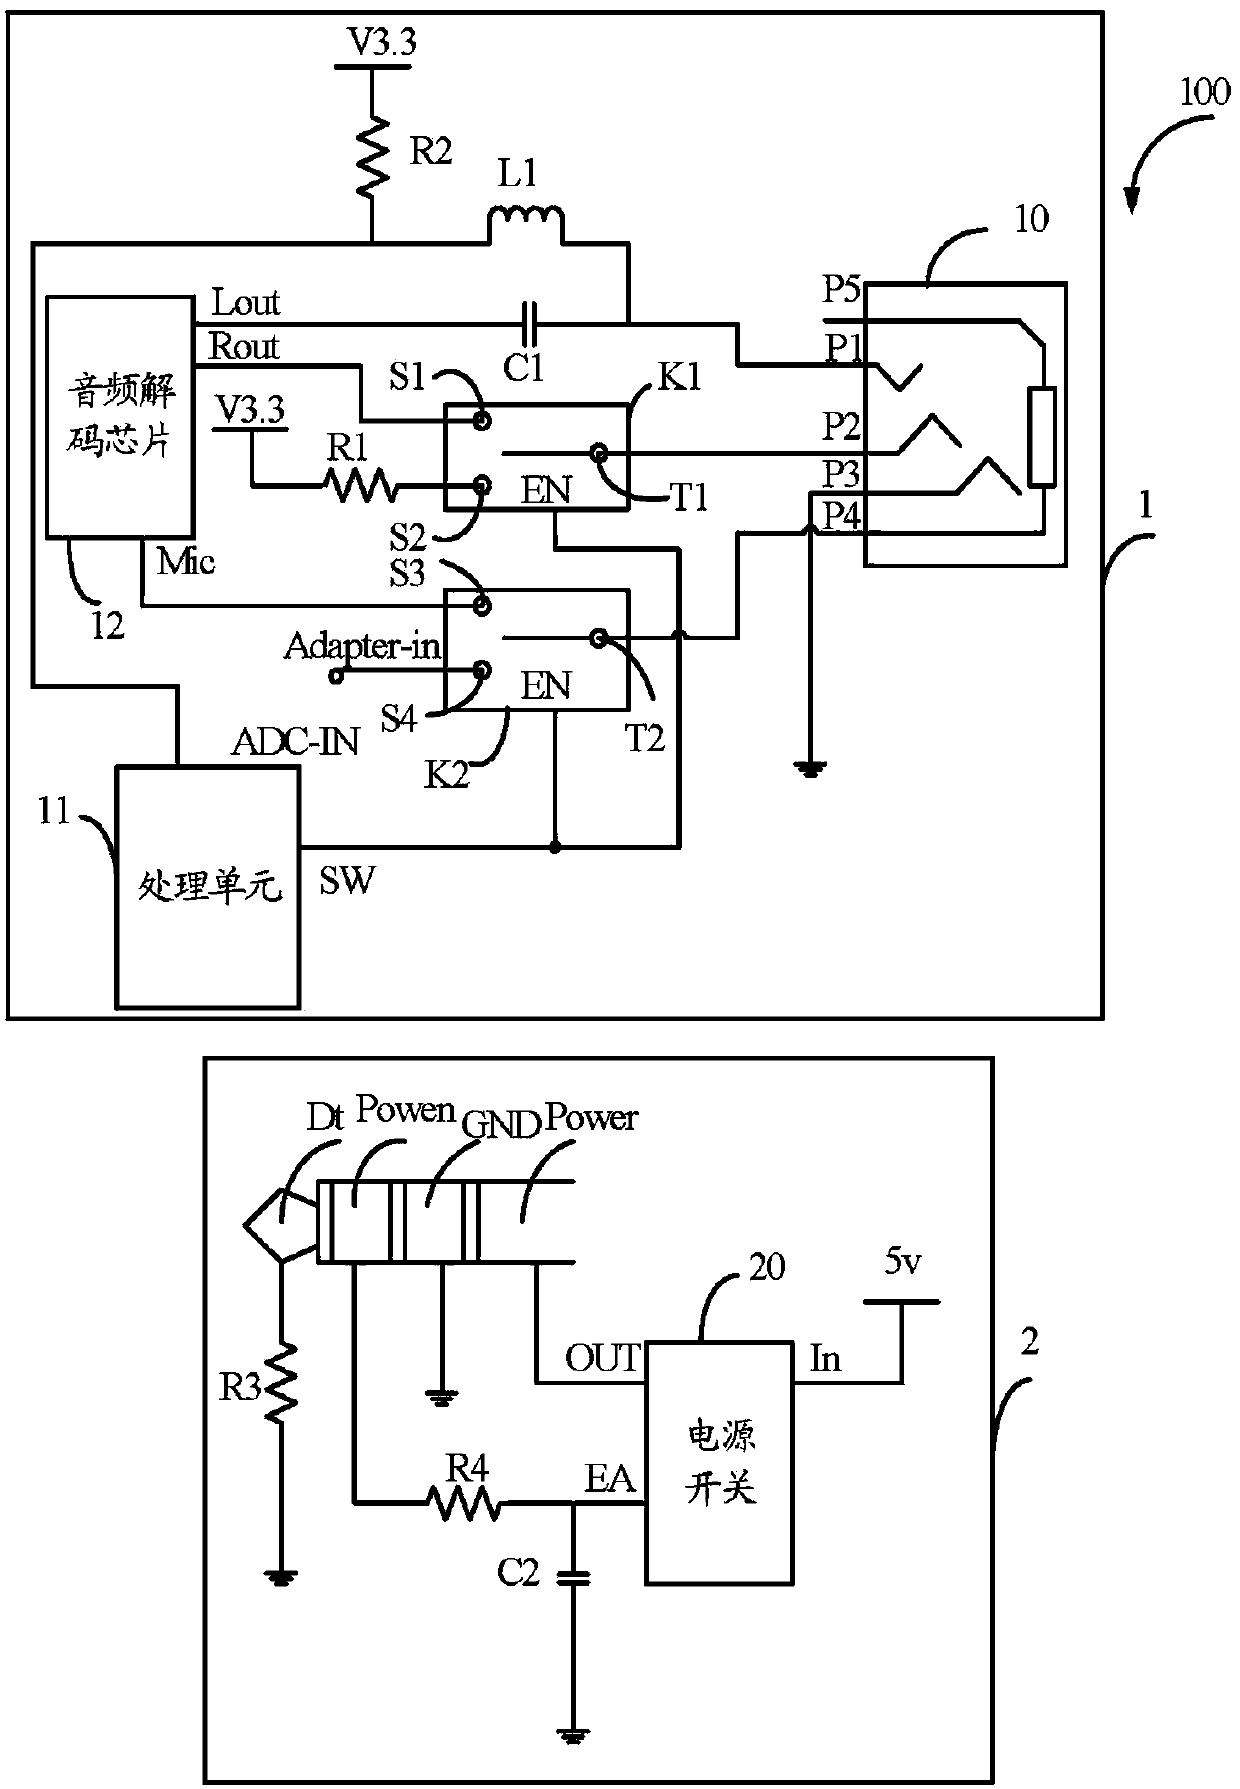 Power supply system supplying power through headset connecting port, electronic device and headset power line